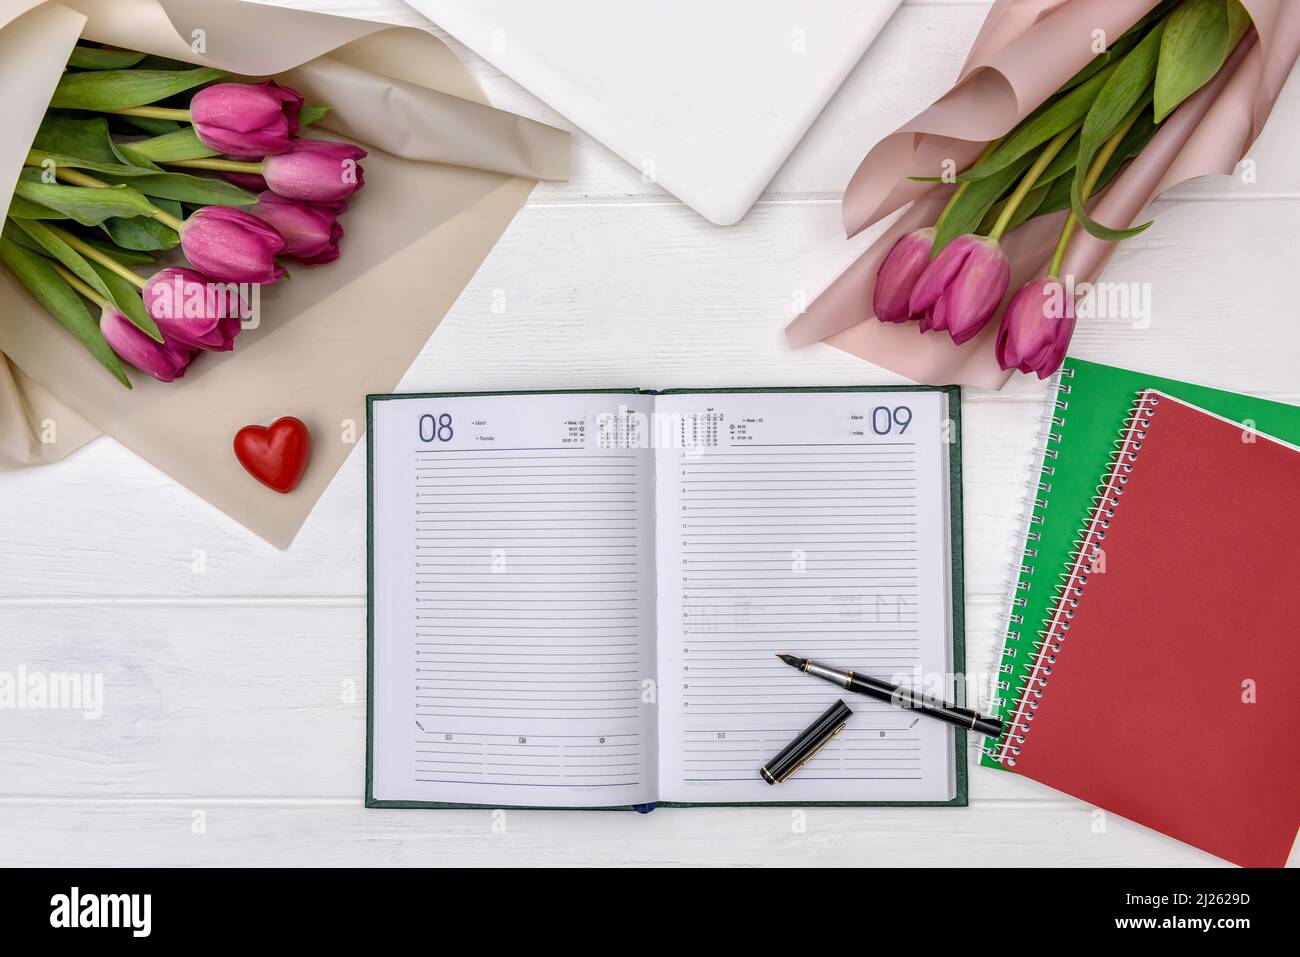 Blank notepad with tulips on wooden table Stock Photo